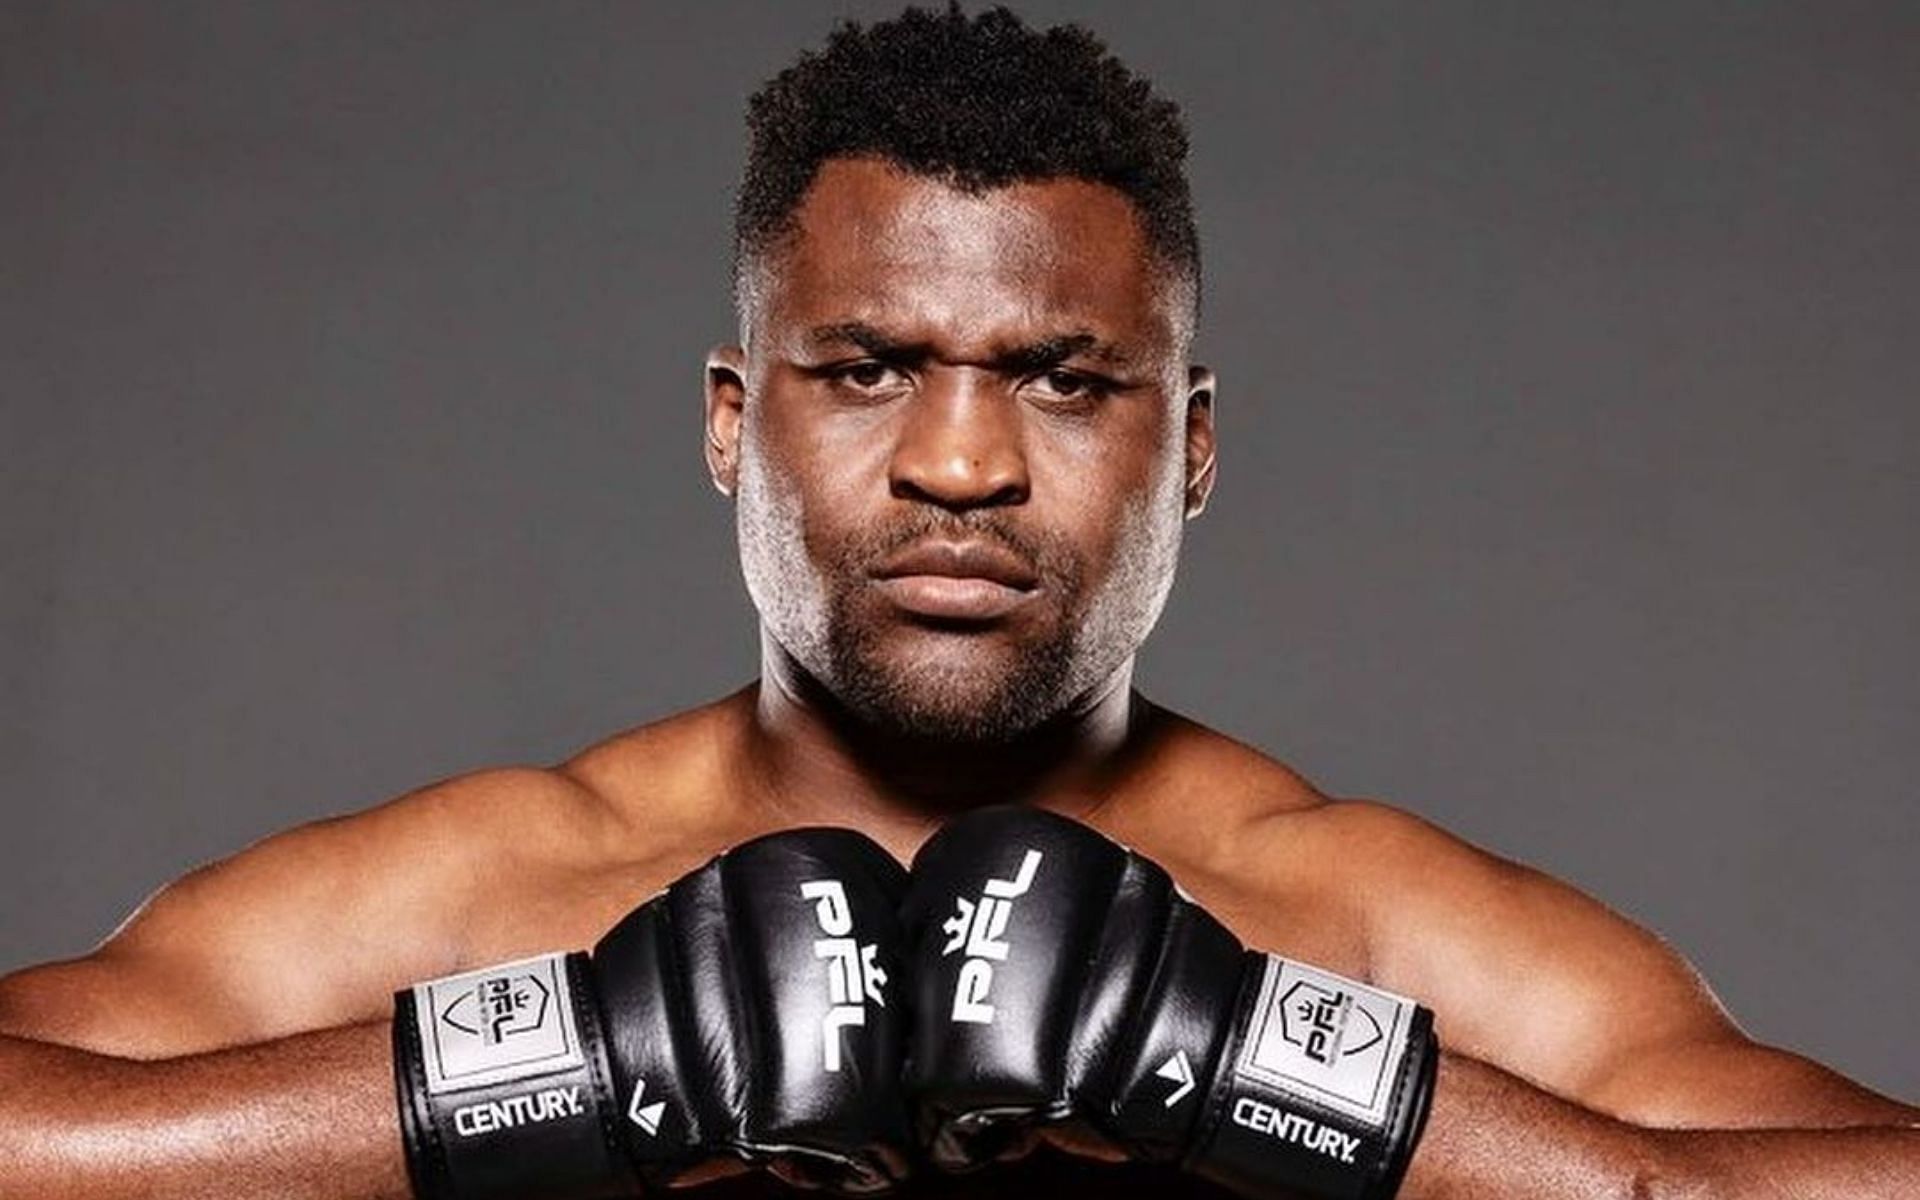 Francis Ngannou discusses his ambition to transition into boxing while pursuing UFC in his early days